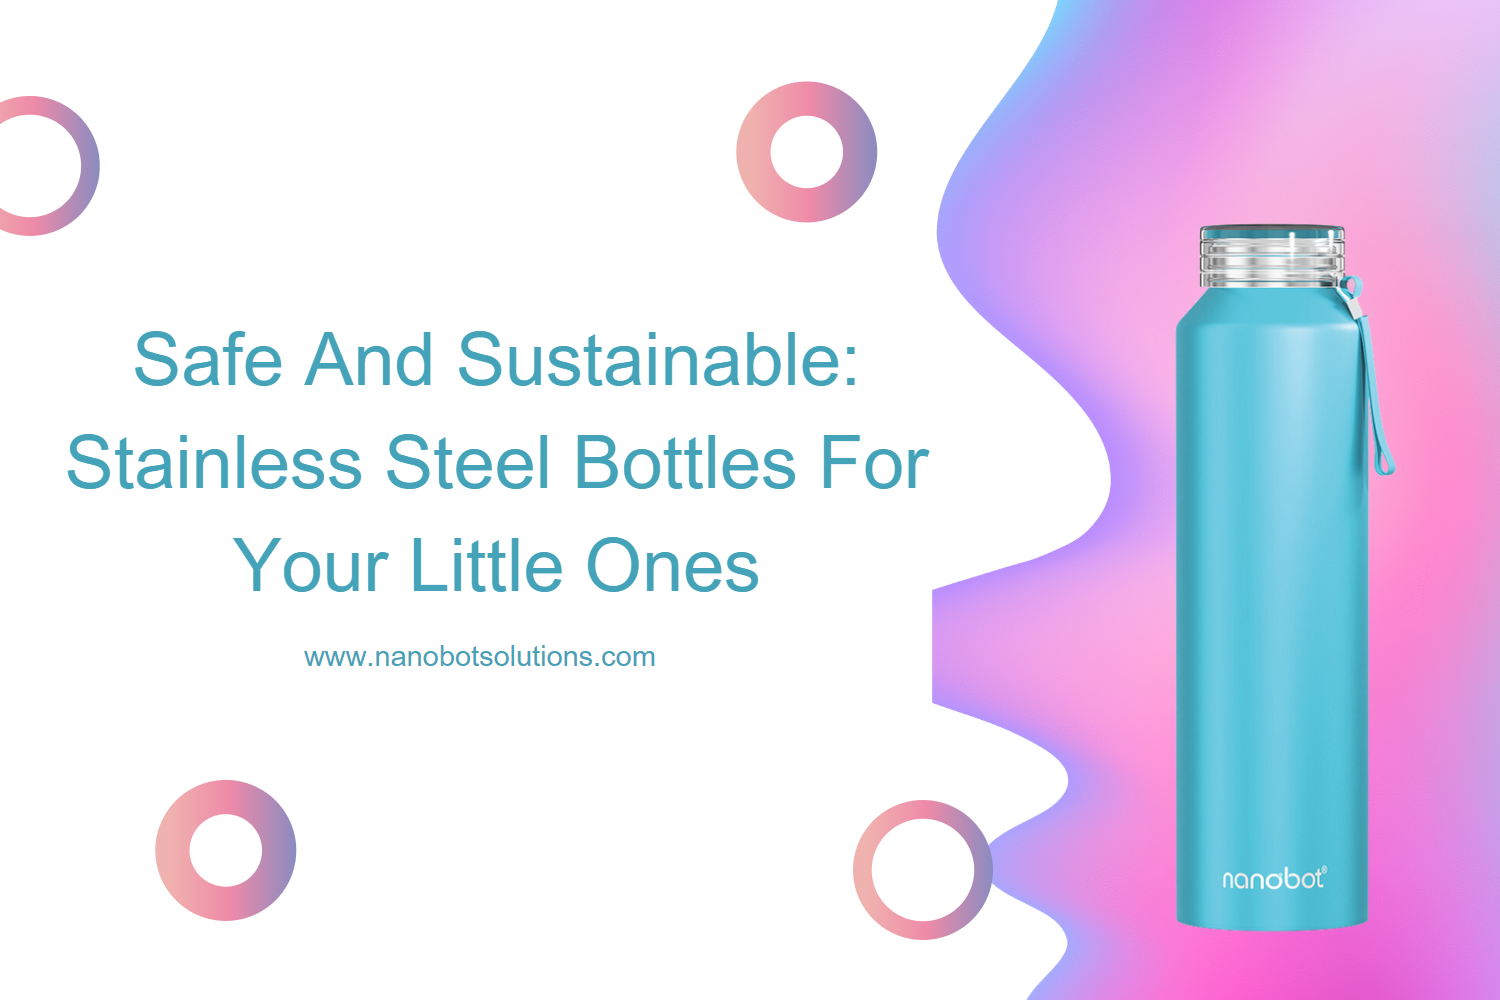 Safe and Sustainable: Stainless Steel Bottles for Your Little Ones -Nanobot